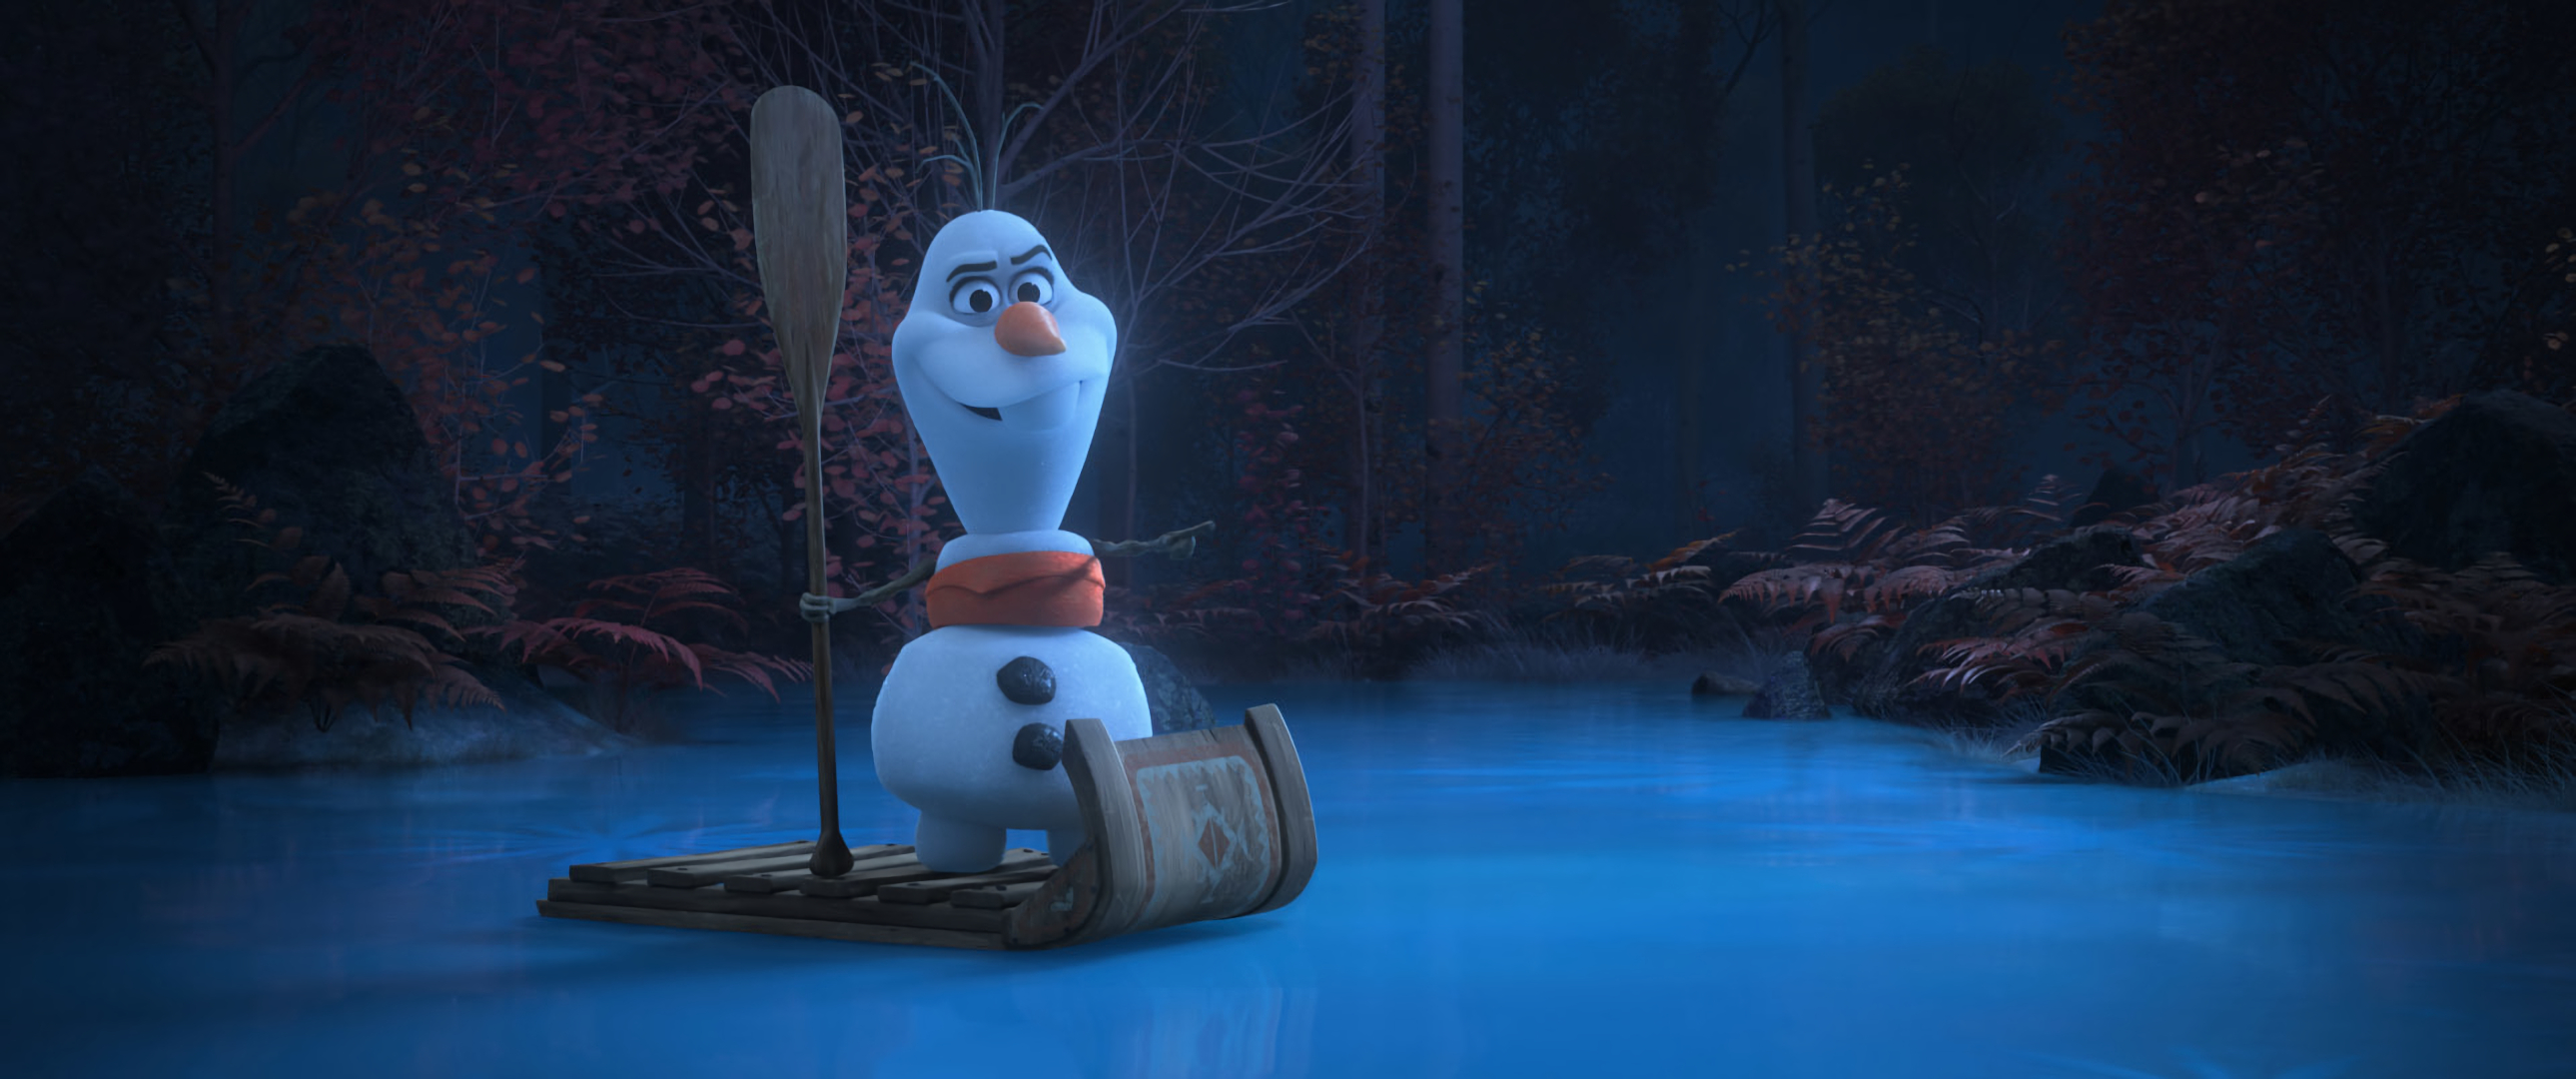 2579x1080 70+ Olaf (Frozen) HD Wallpapers and Backgrounds